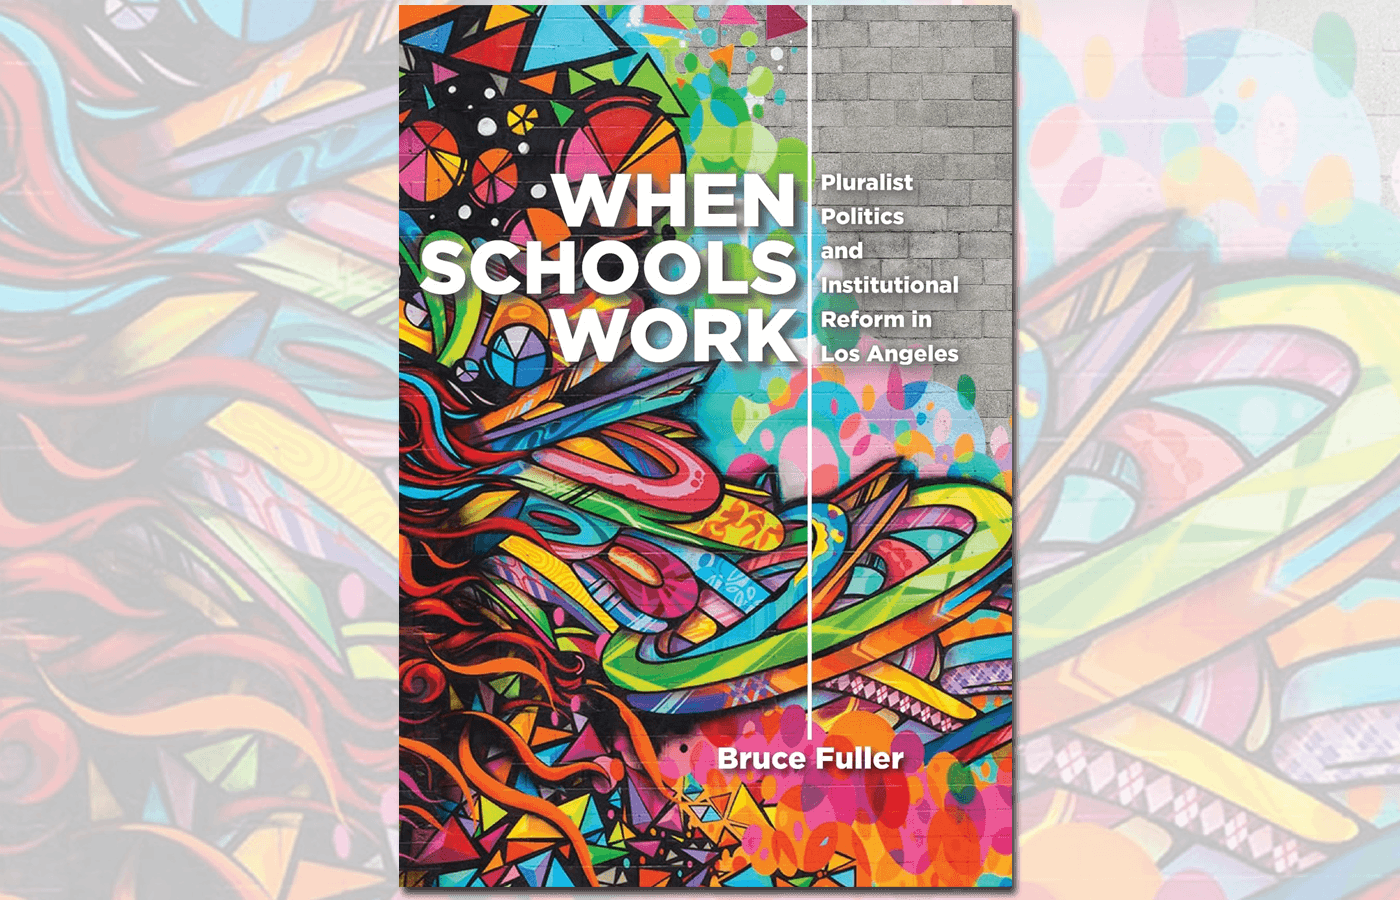 Cover of "When Schools Work" by Bruce Fuller